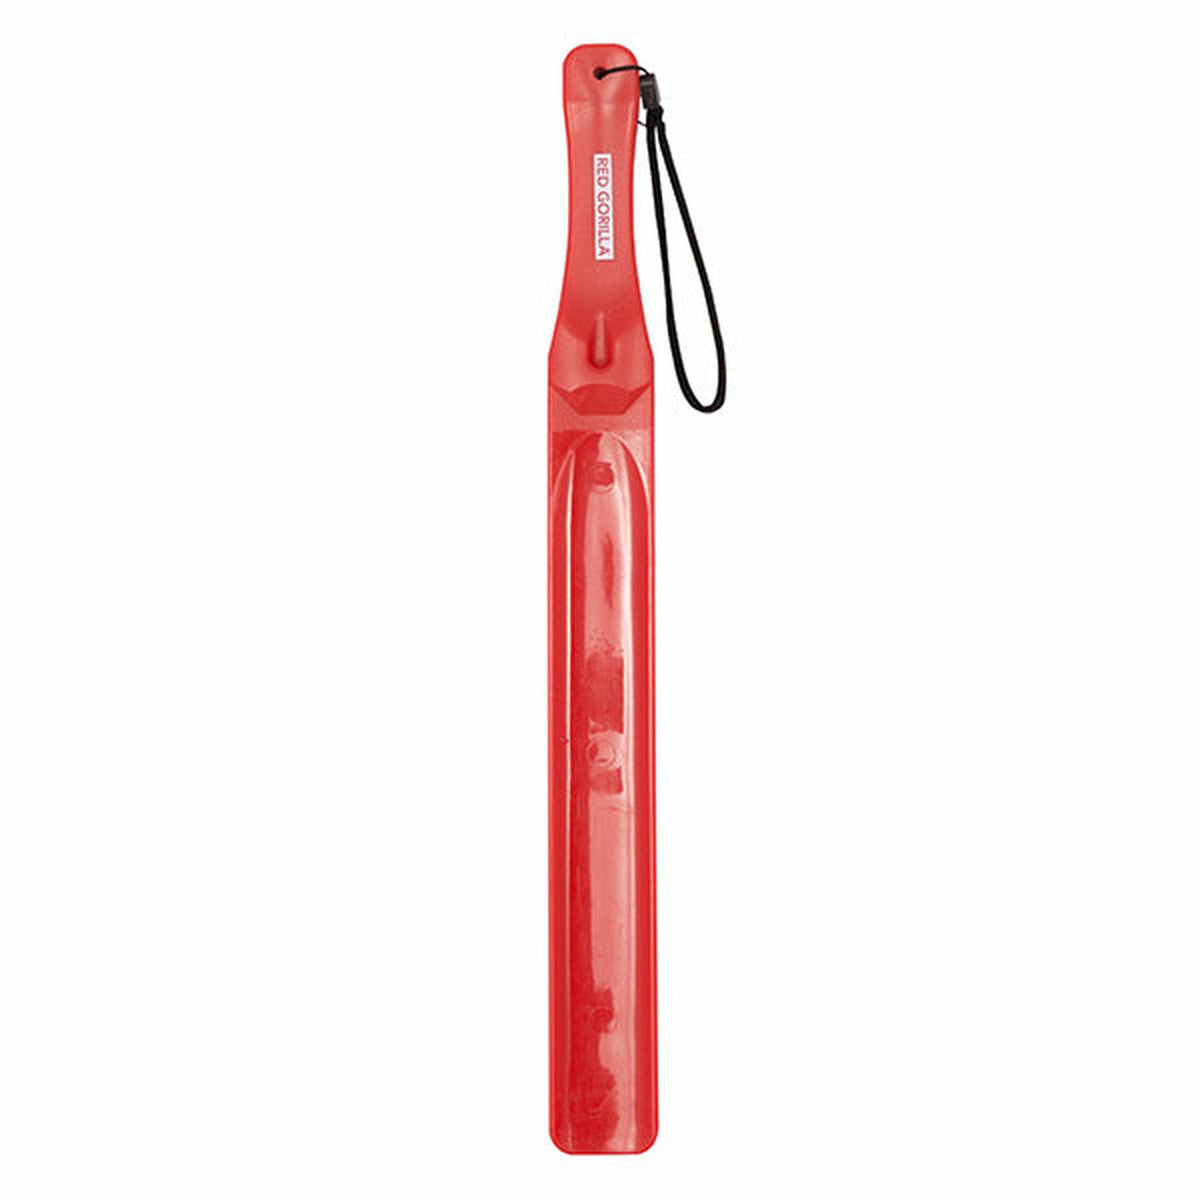 Red plastic feed stirrer, narrowed at the handle with black hand loop.